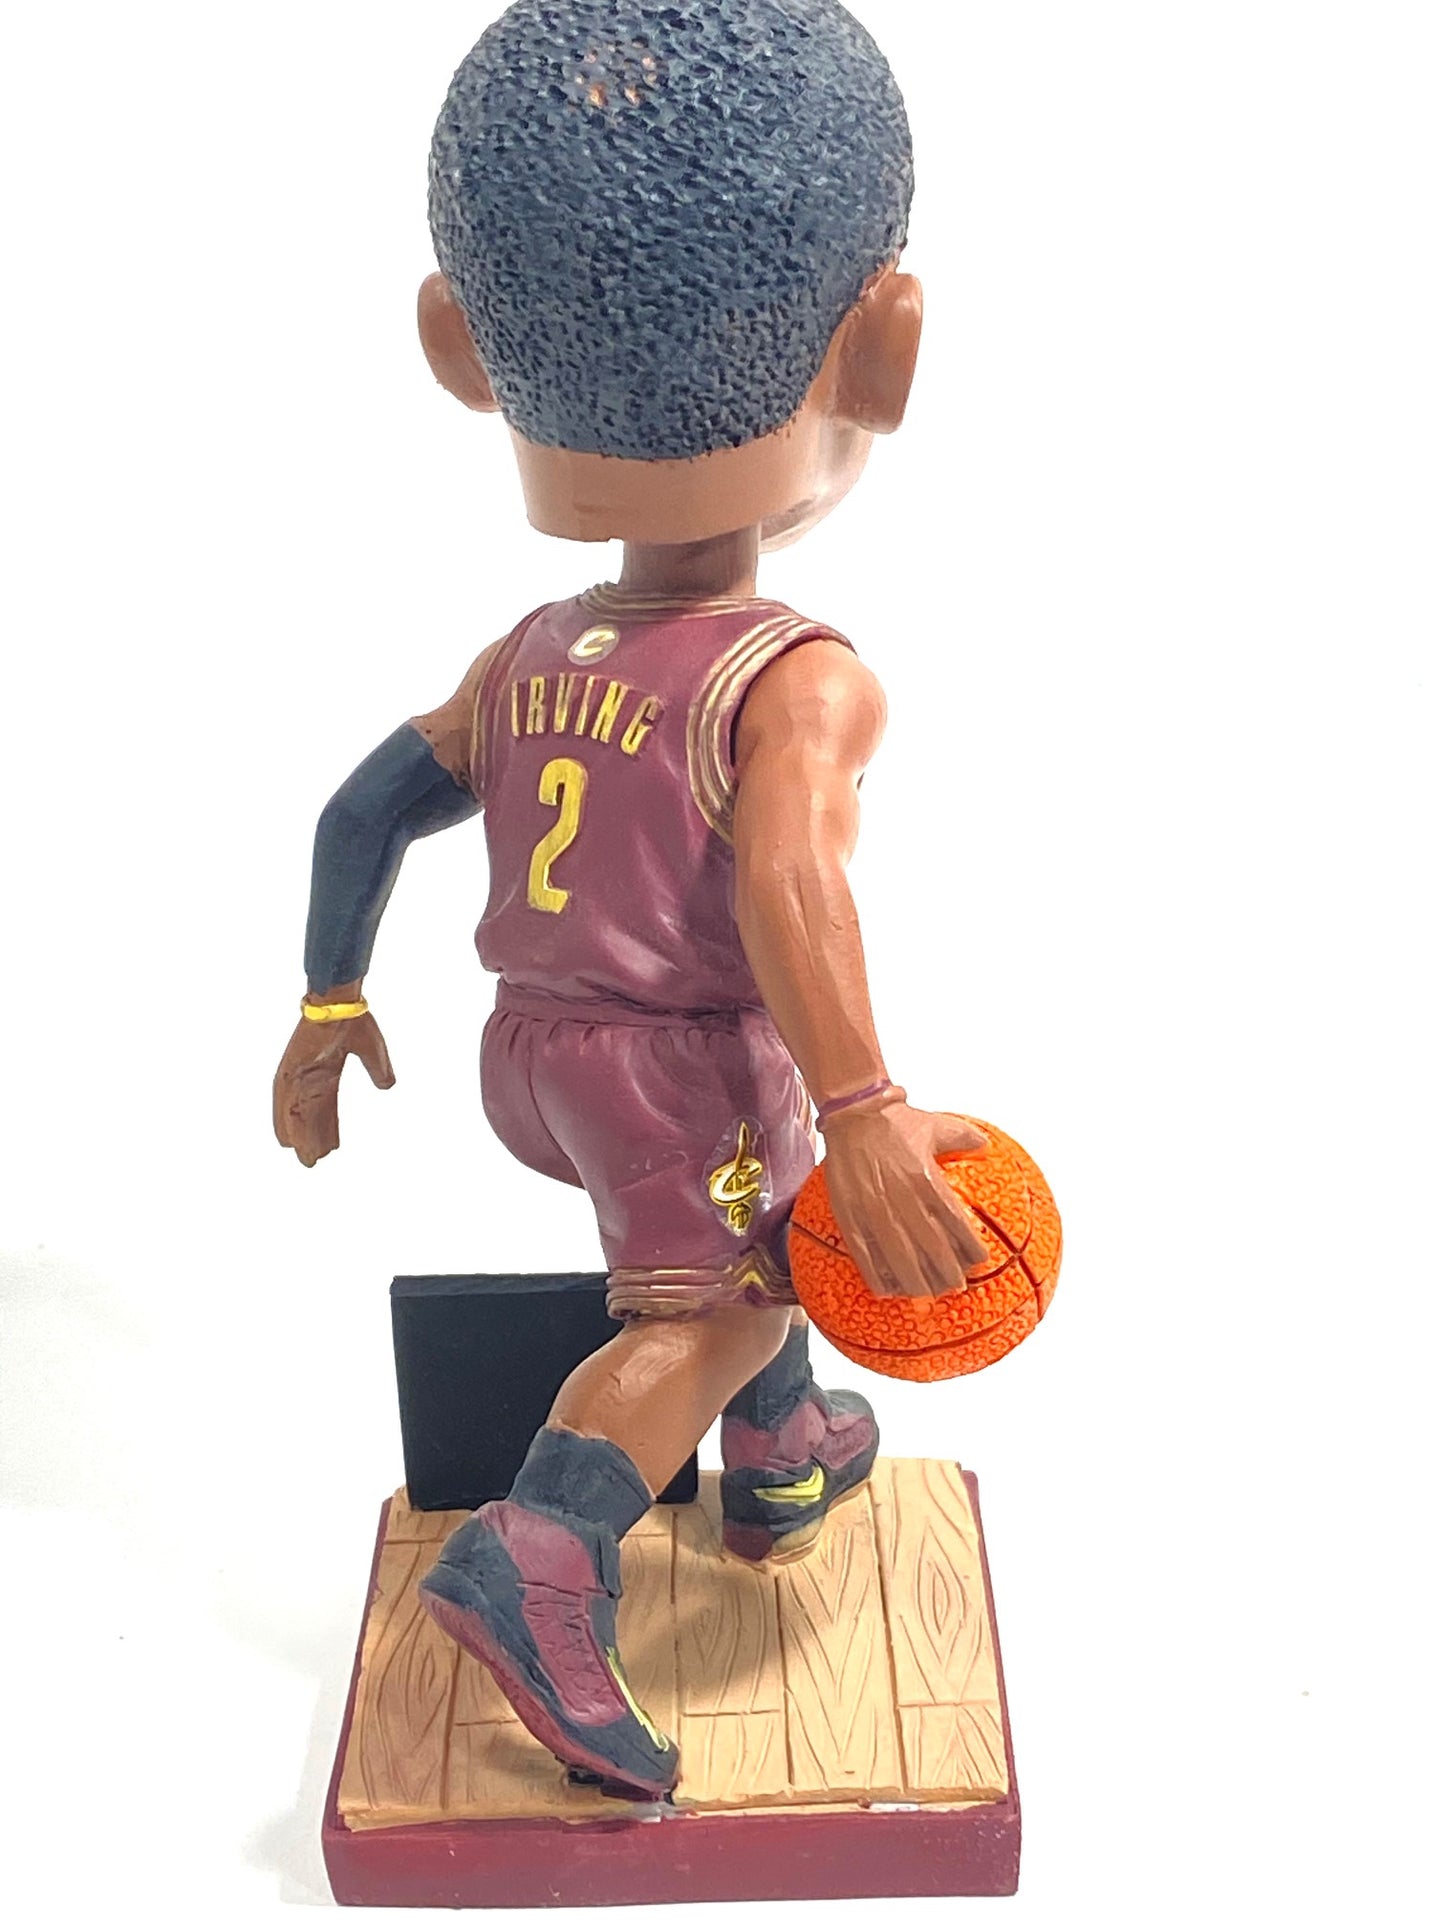 Kyrie Irving 2014 NBA Cleveland Cavaliers Bobblehead (Used) by Cavanaugh Marketing Network